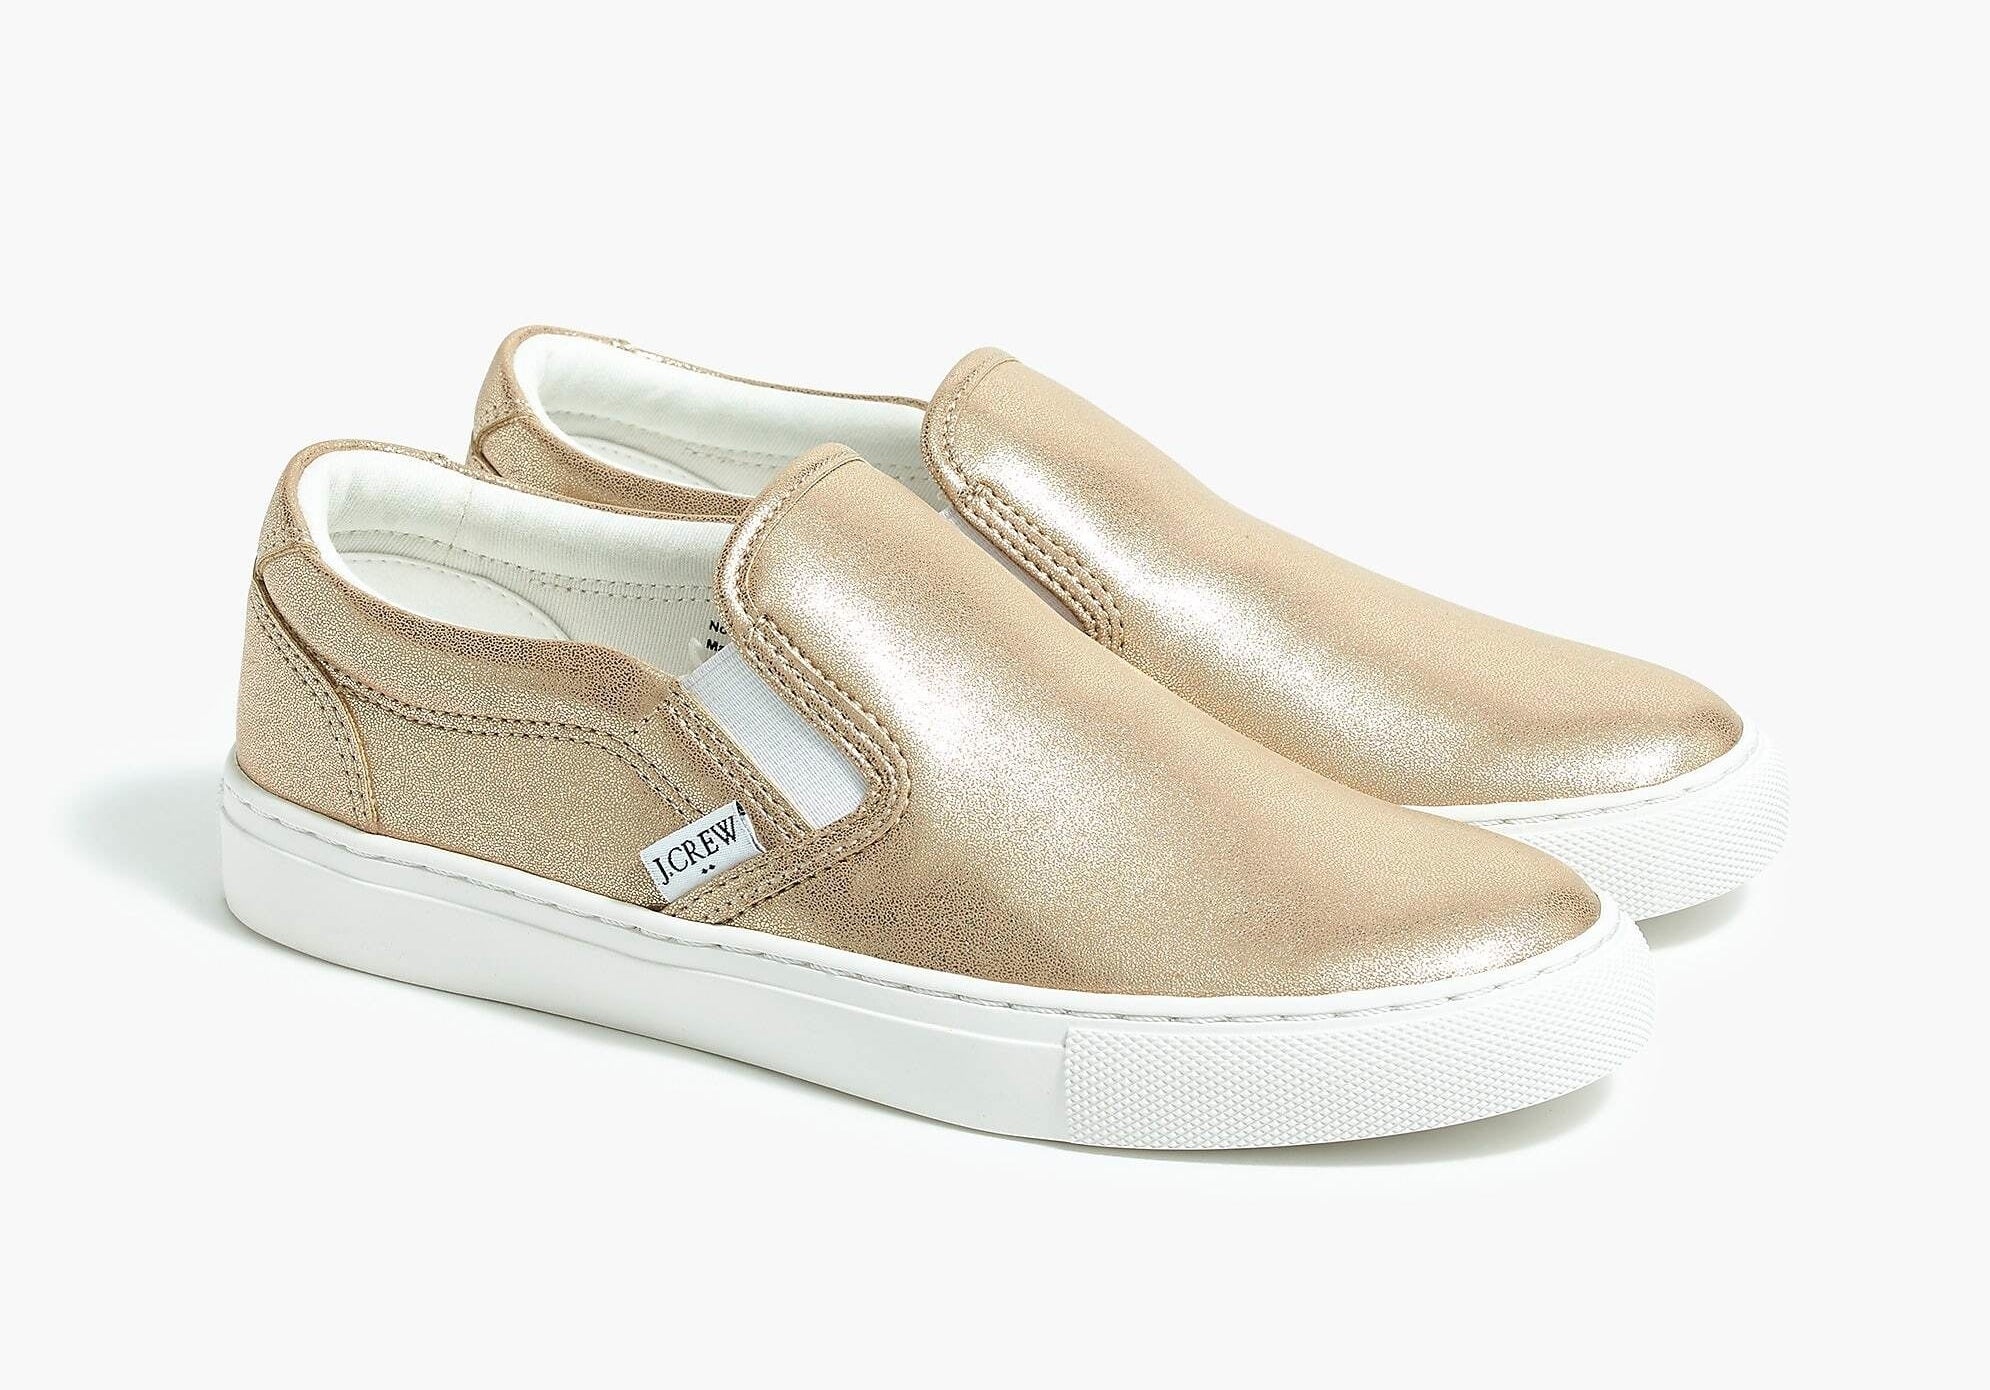 The metallic gold slip-on canvas sneakers